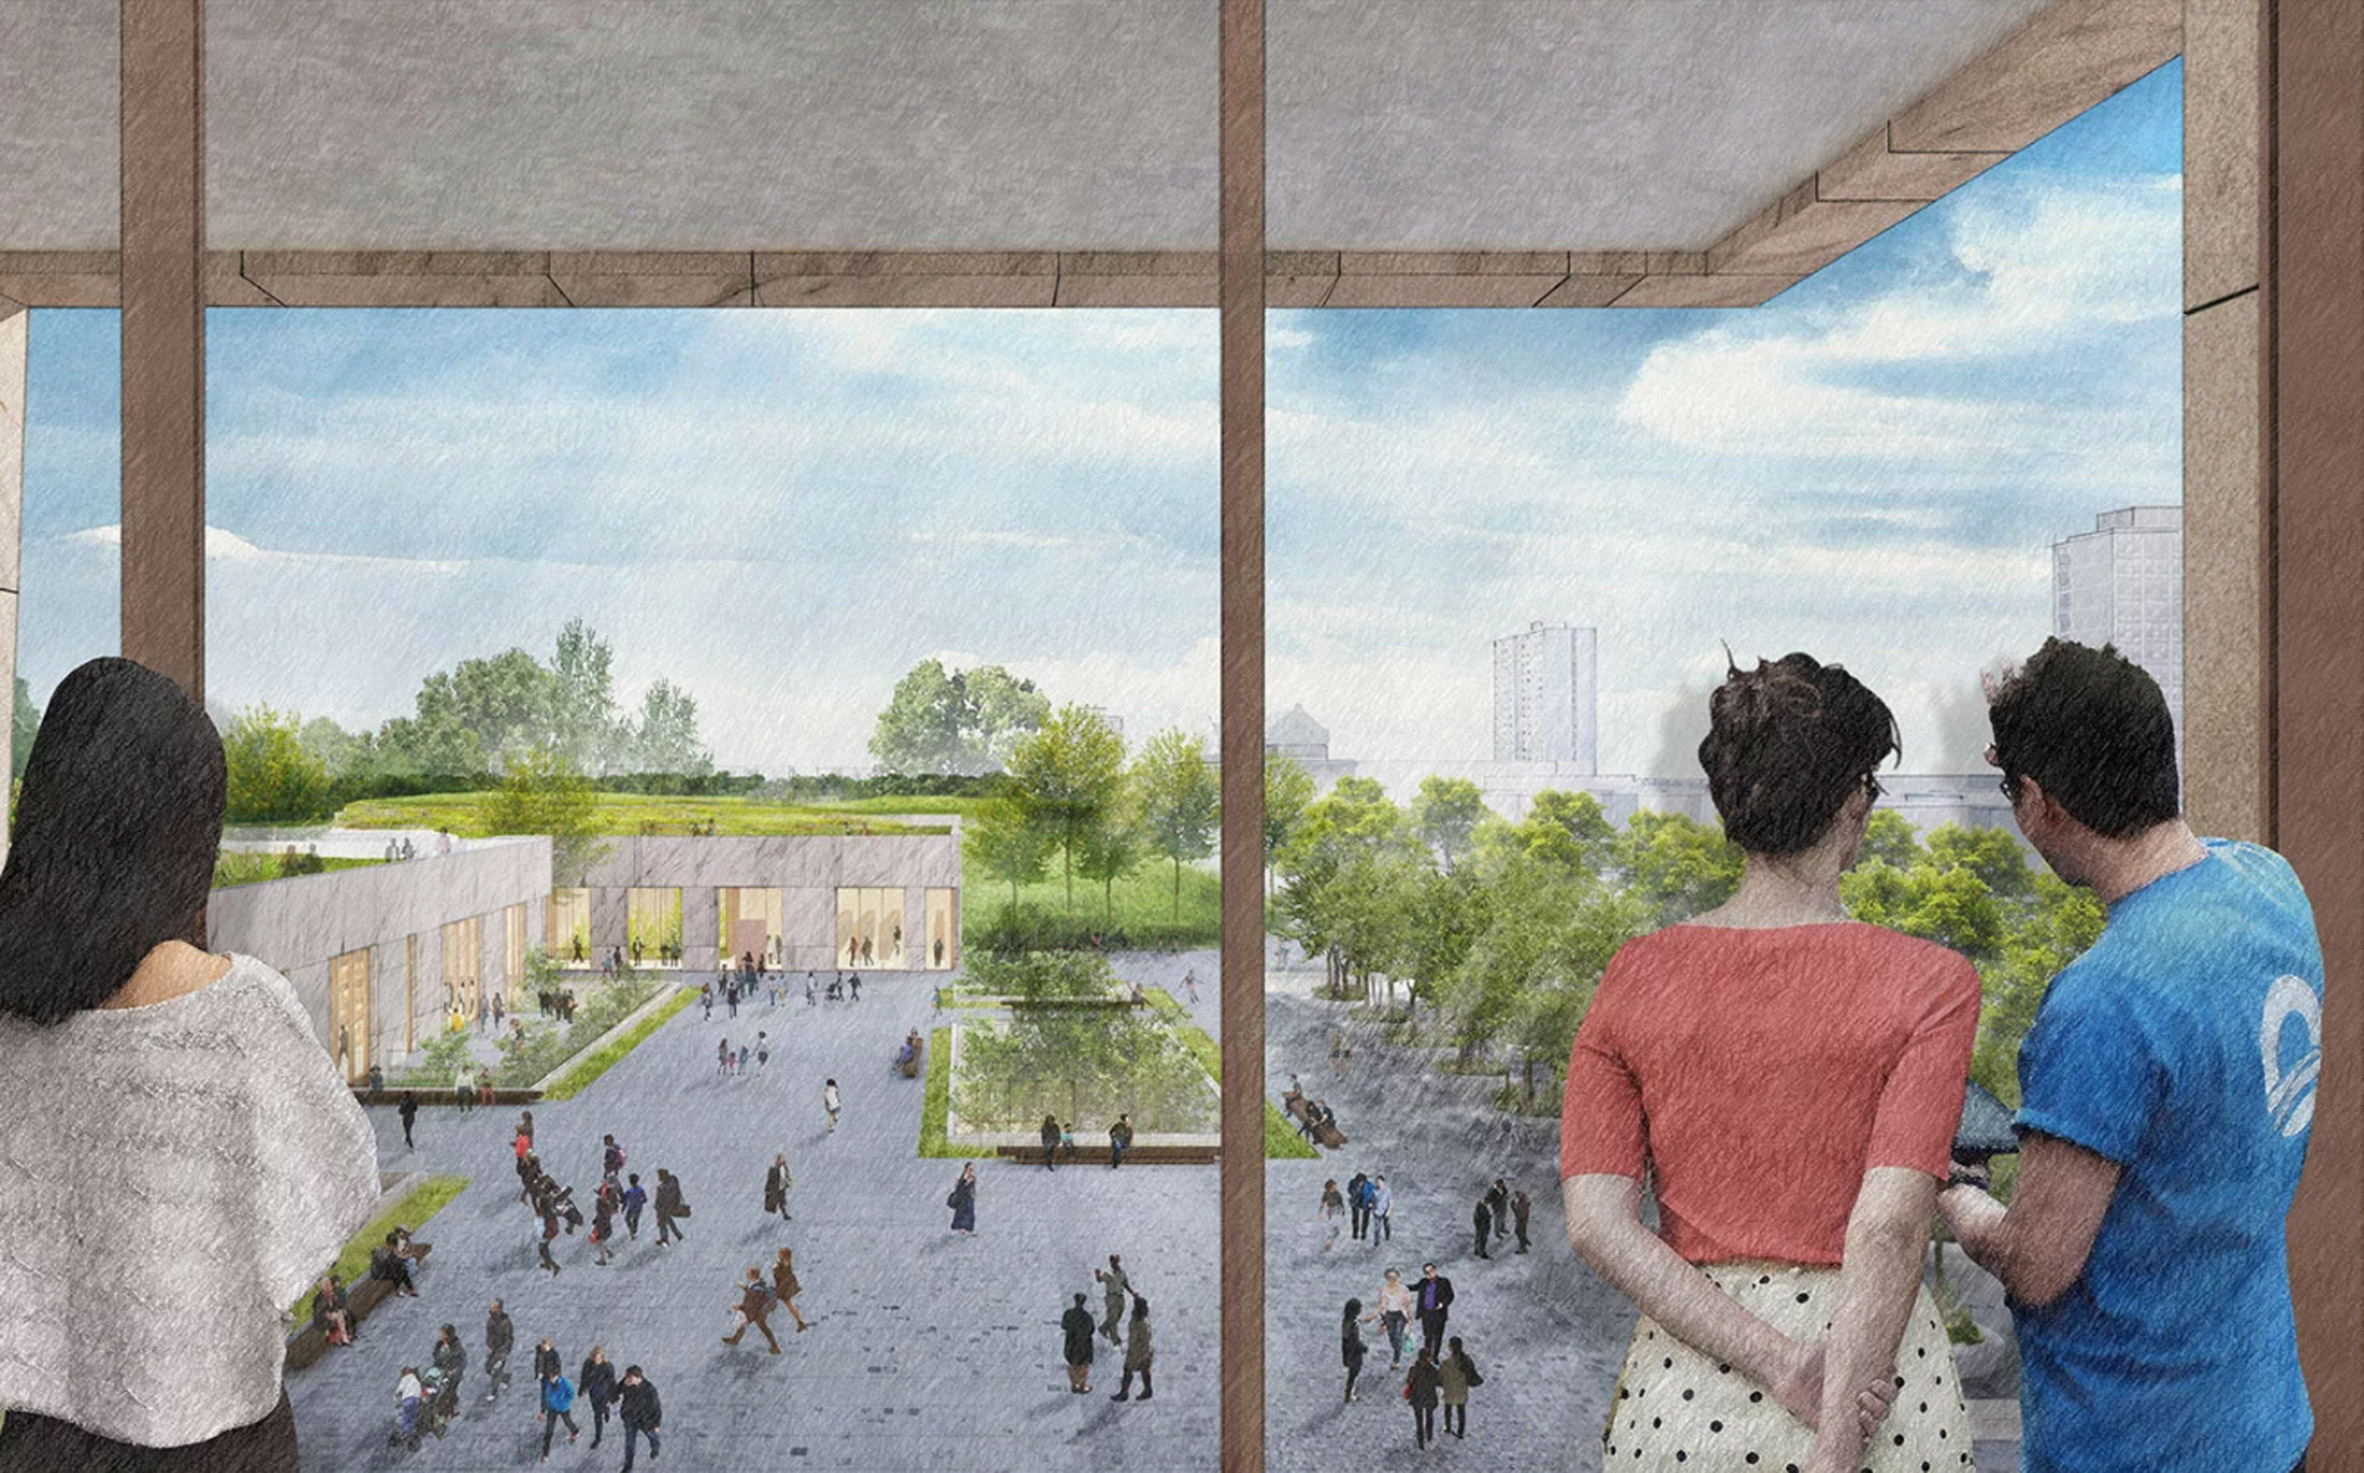 Obamas reveal more details and images for Presidential Center in Chicago